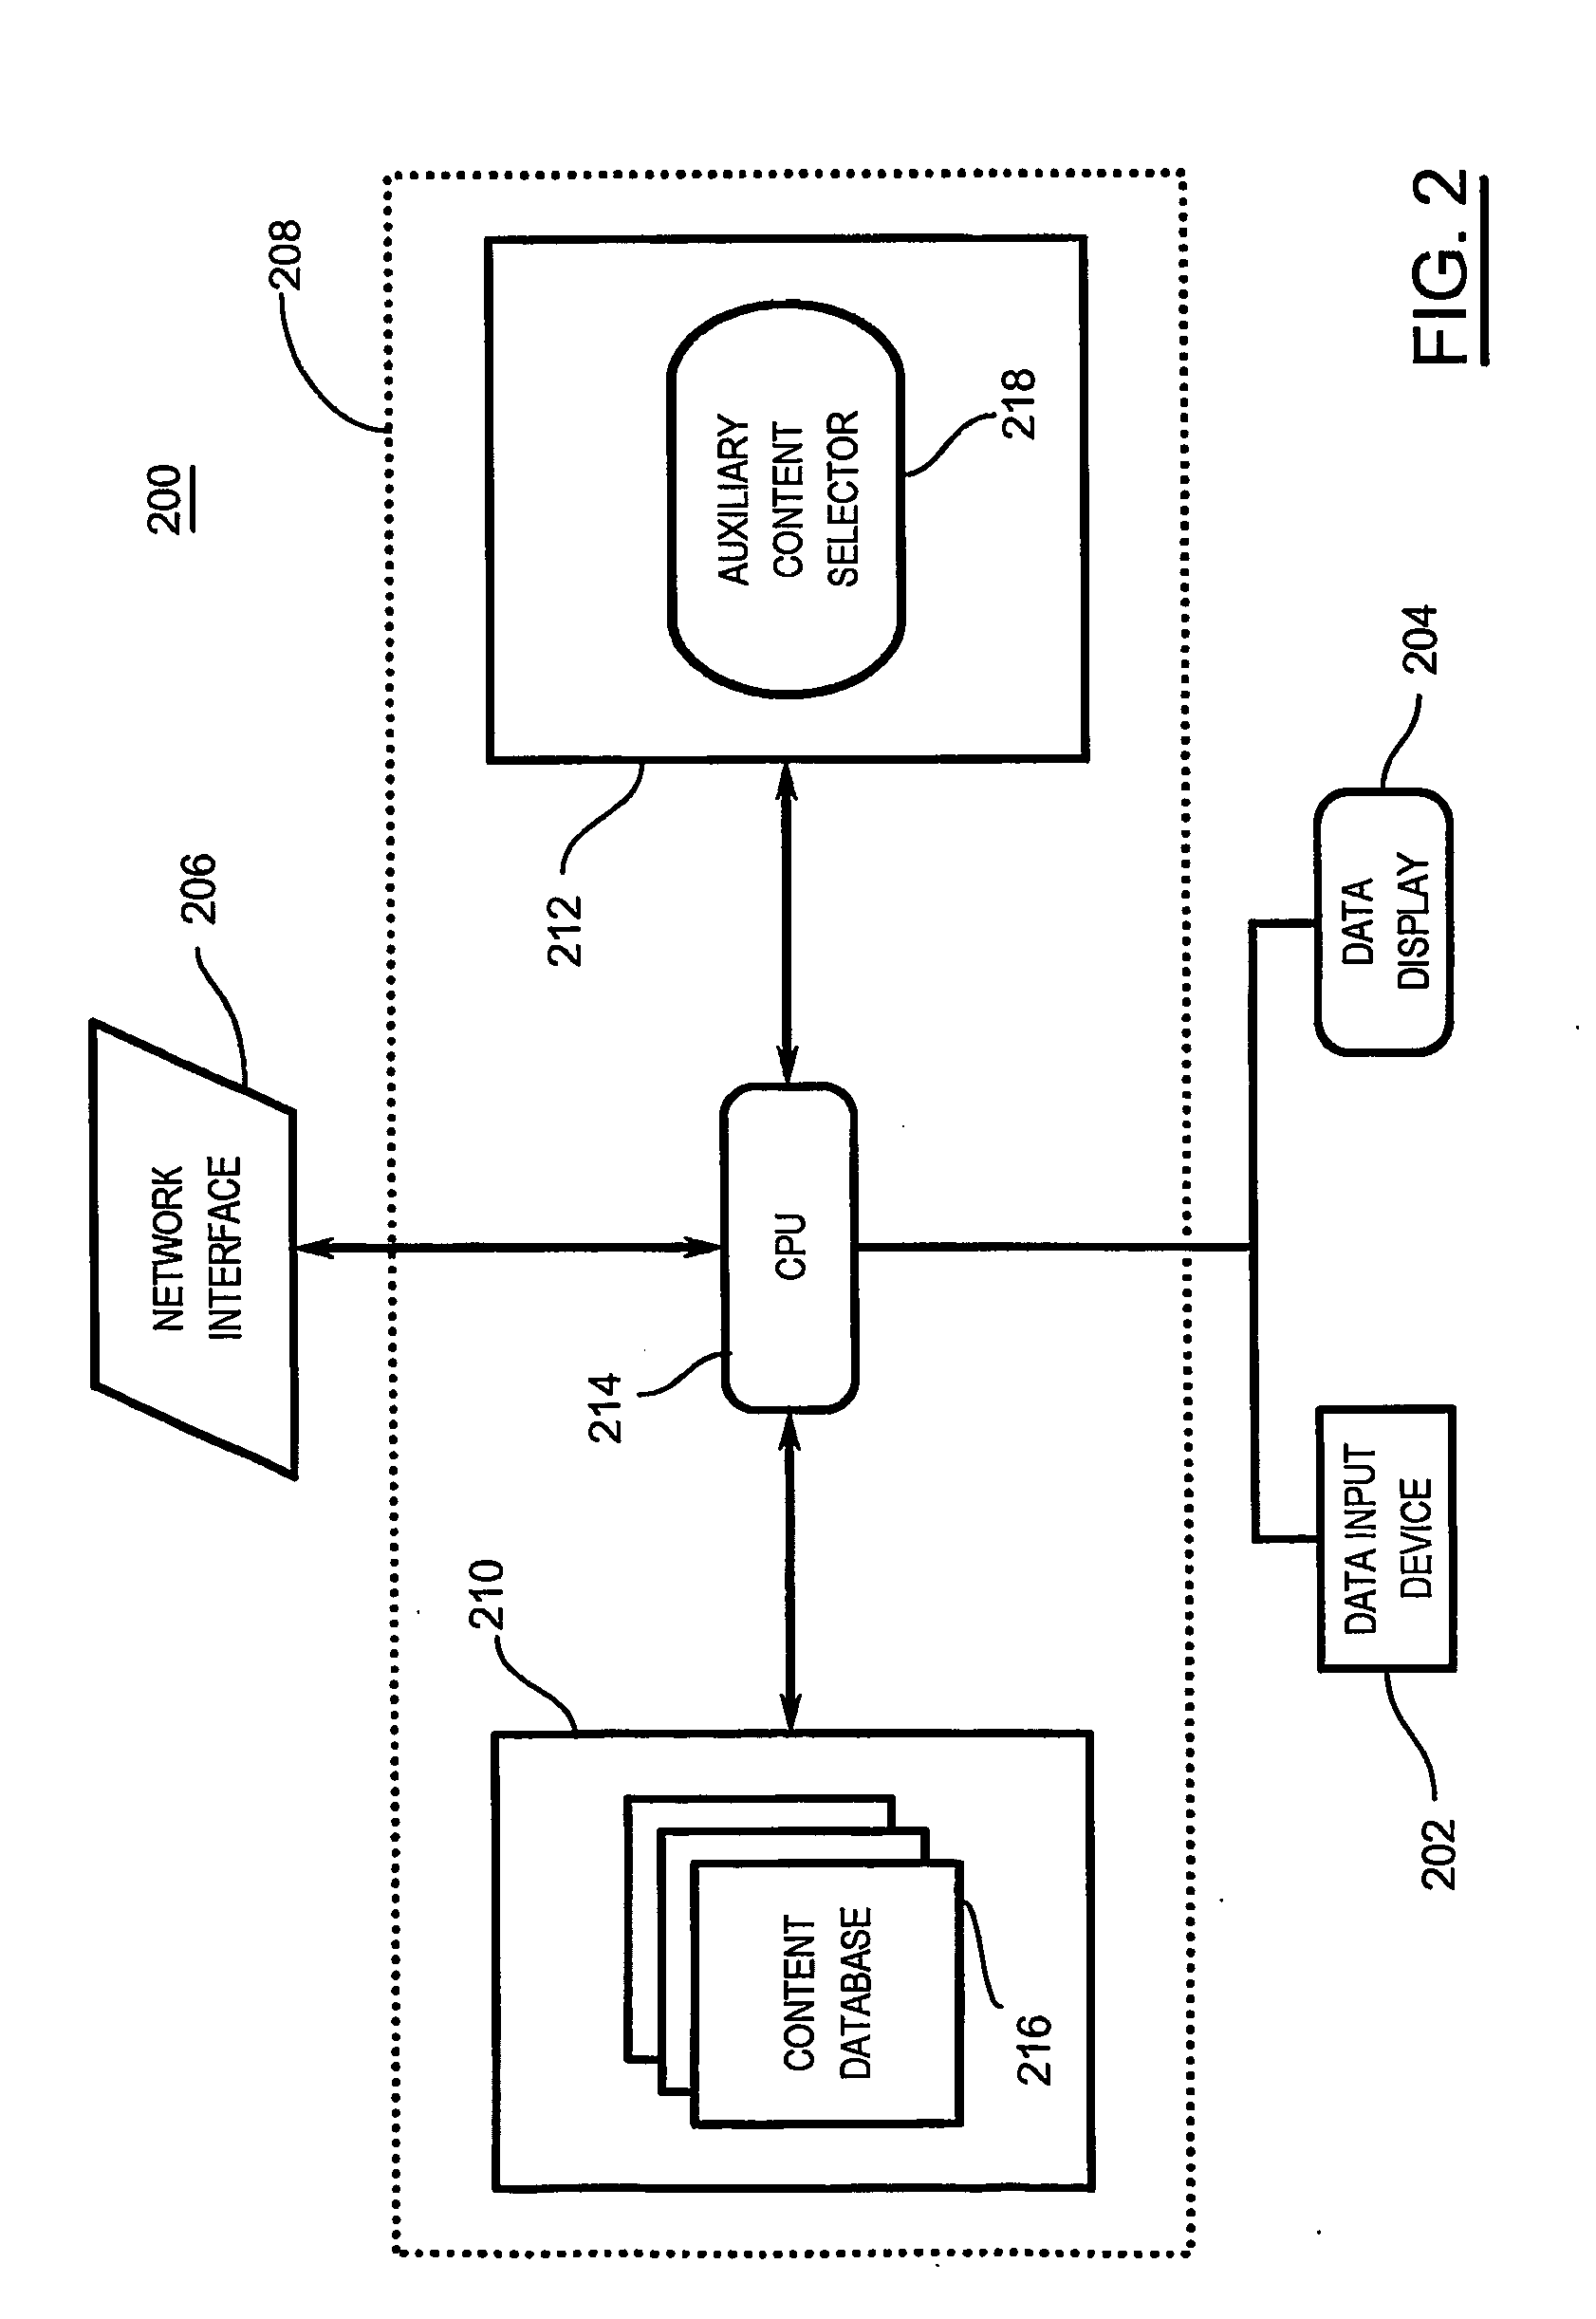 Auxiliary content delivery system